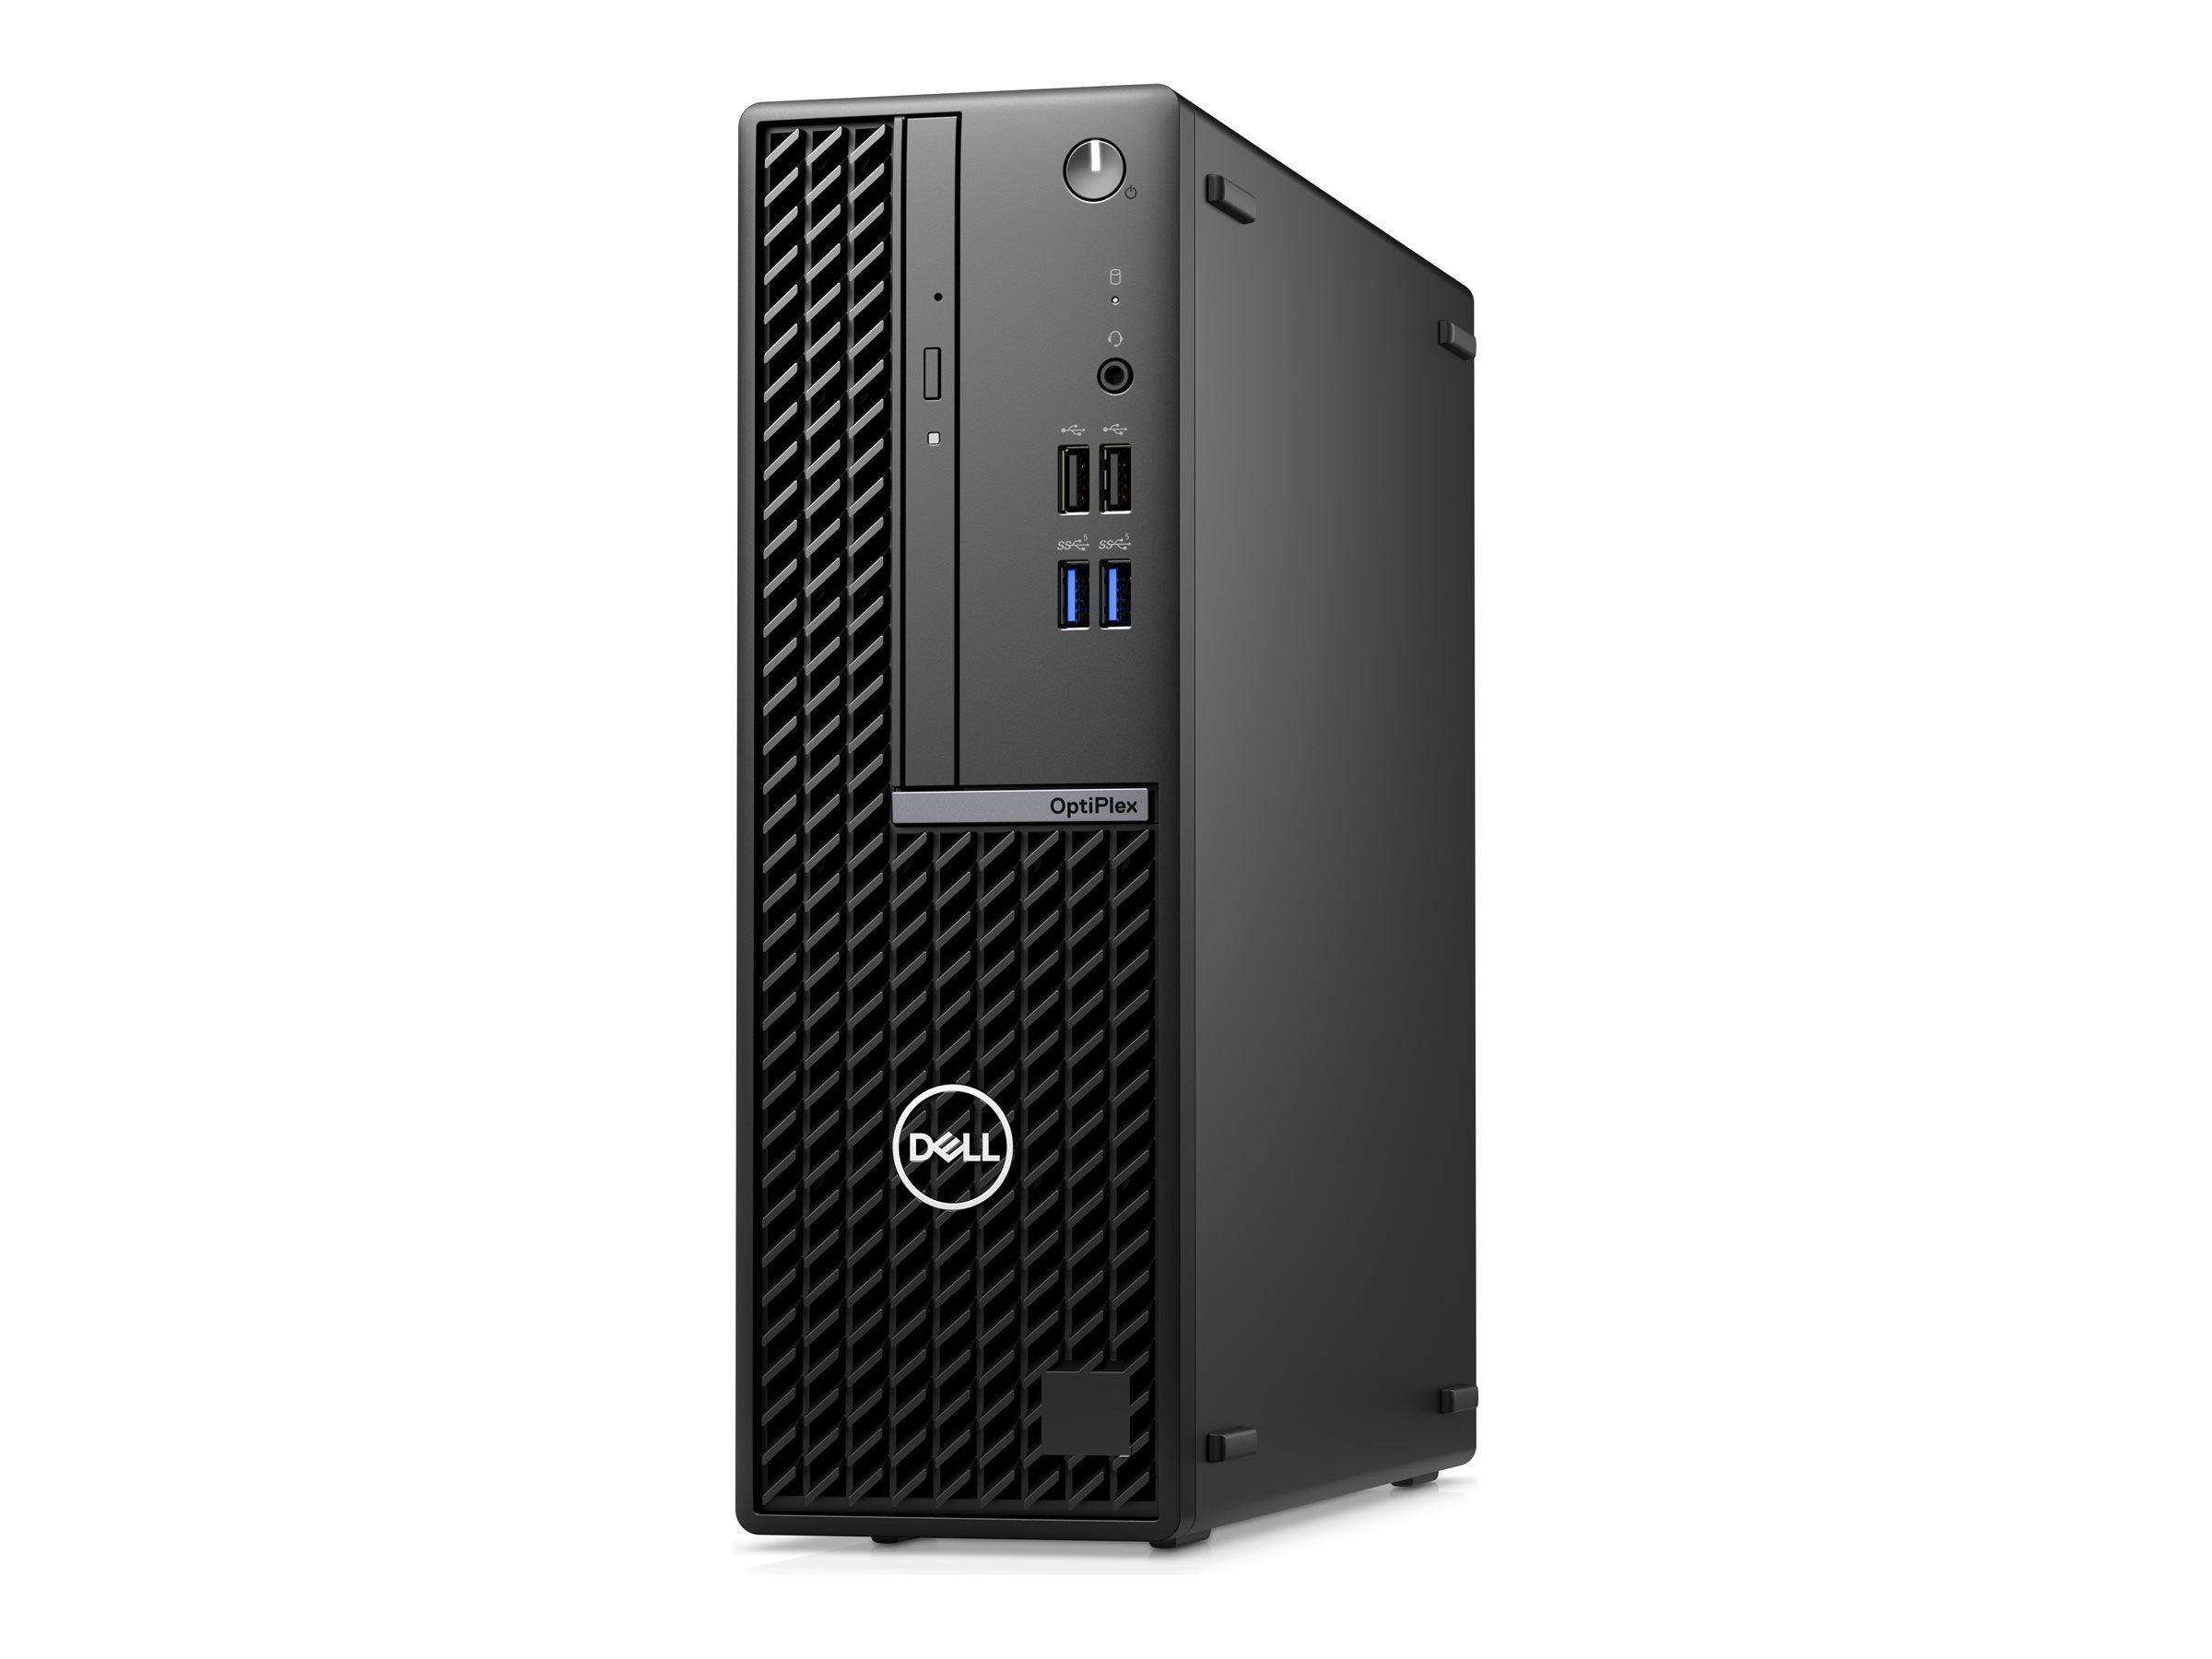 Desktop Dell OptiPlex 7010 Plus SFF, 300W Platinum Power Supply, WW, EPEAT 2018 Registered (Silver), ENERGY STAR Qualified, SW Driver, Intel Rapid Storage Technology, OptiPlex Small Form, Trusted Platform Module (Discrete TPM Enabled), 13th Gen Intel Core i7-13700 (8+8 Cores/30MB/24T/2.1GHz to_3